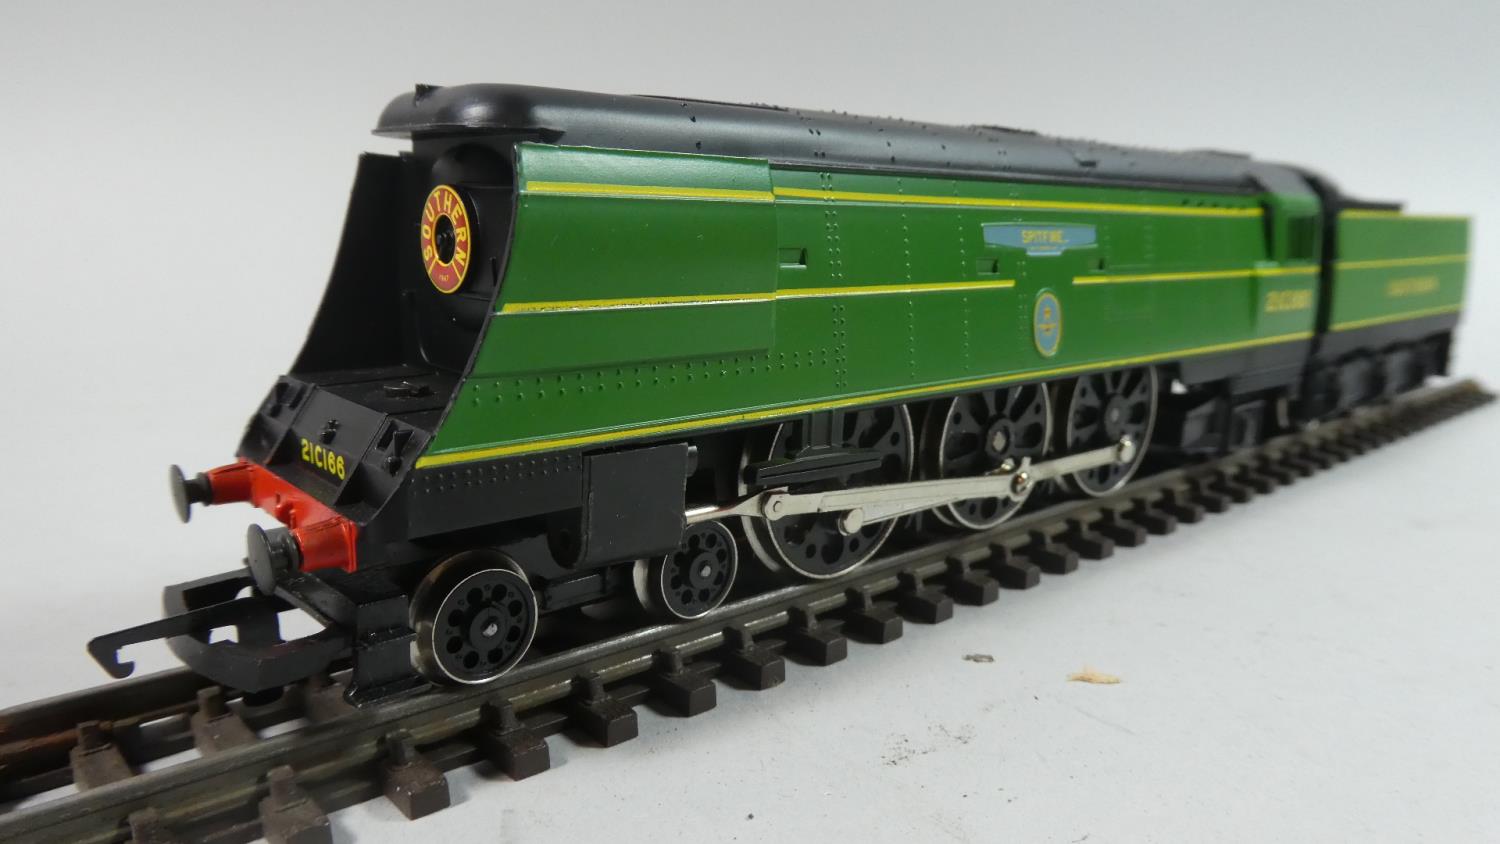 A Boxed OO Gauge Hornby Railways R374 SR Battle of Britain Number 21C166 Spitfire in Malachite Green - Image 2 of 2